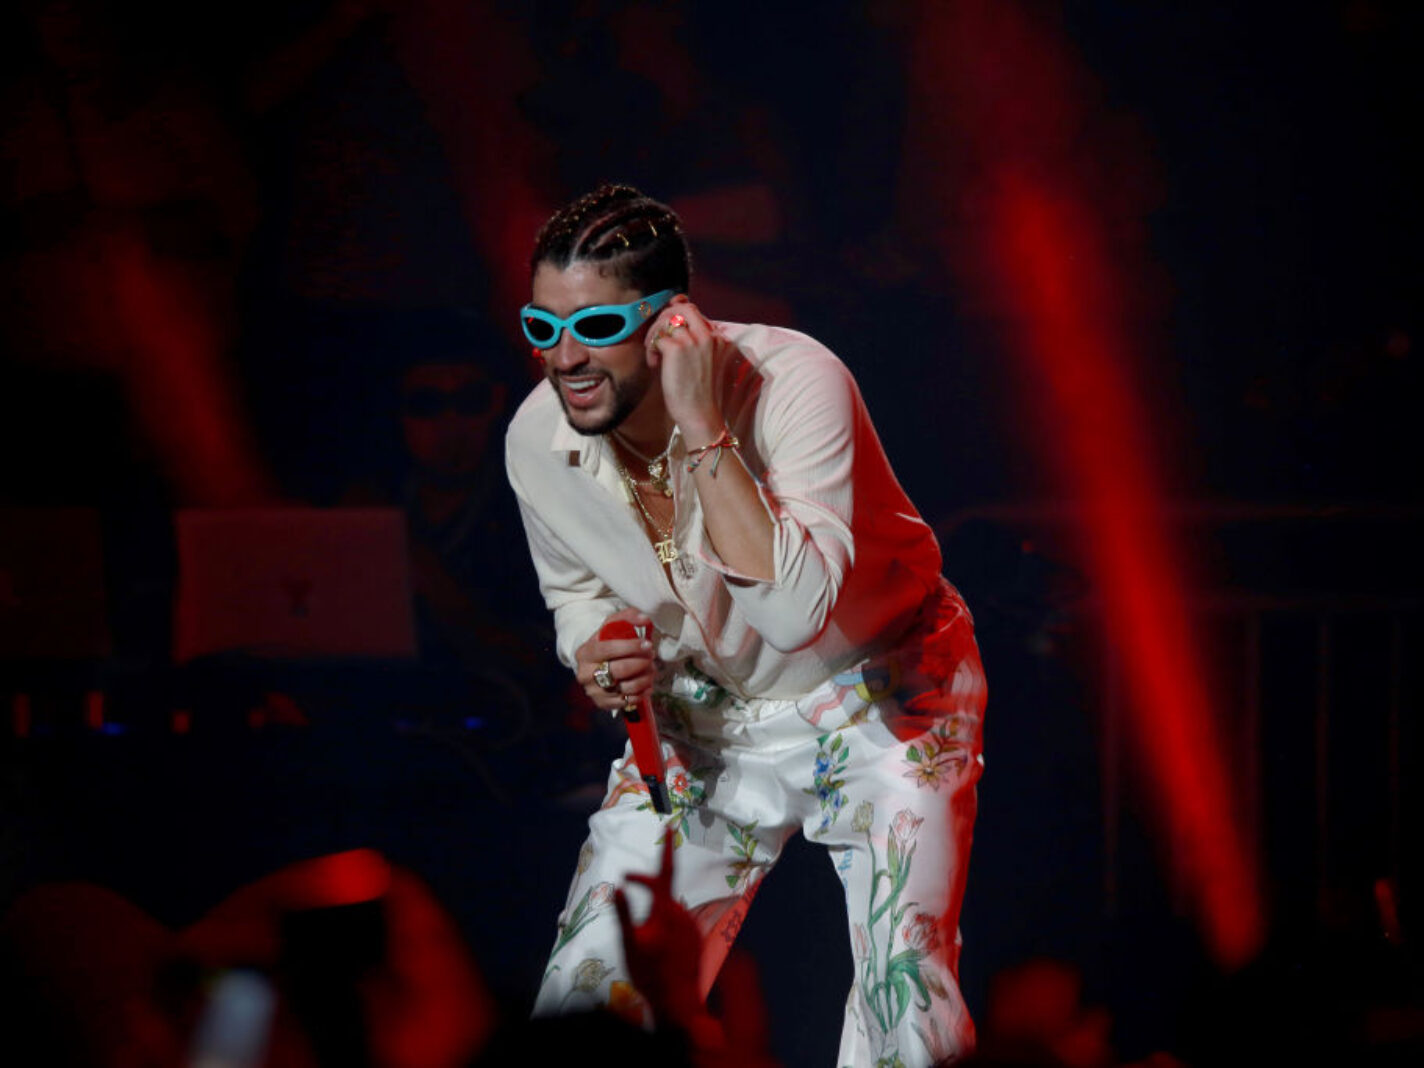 Here Are All the Special Guests at Bad Bunny's 'Un Verano Sin Ti' Show